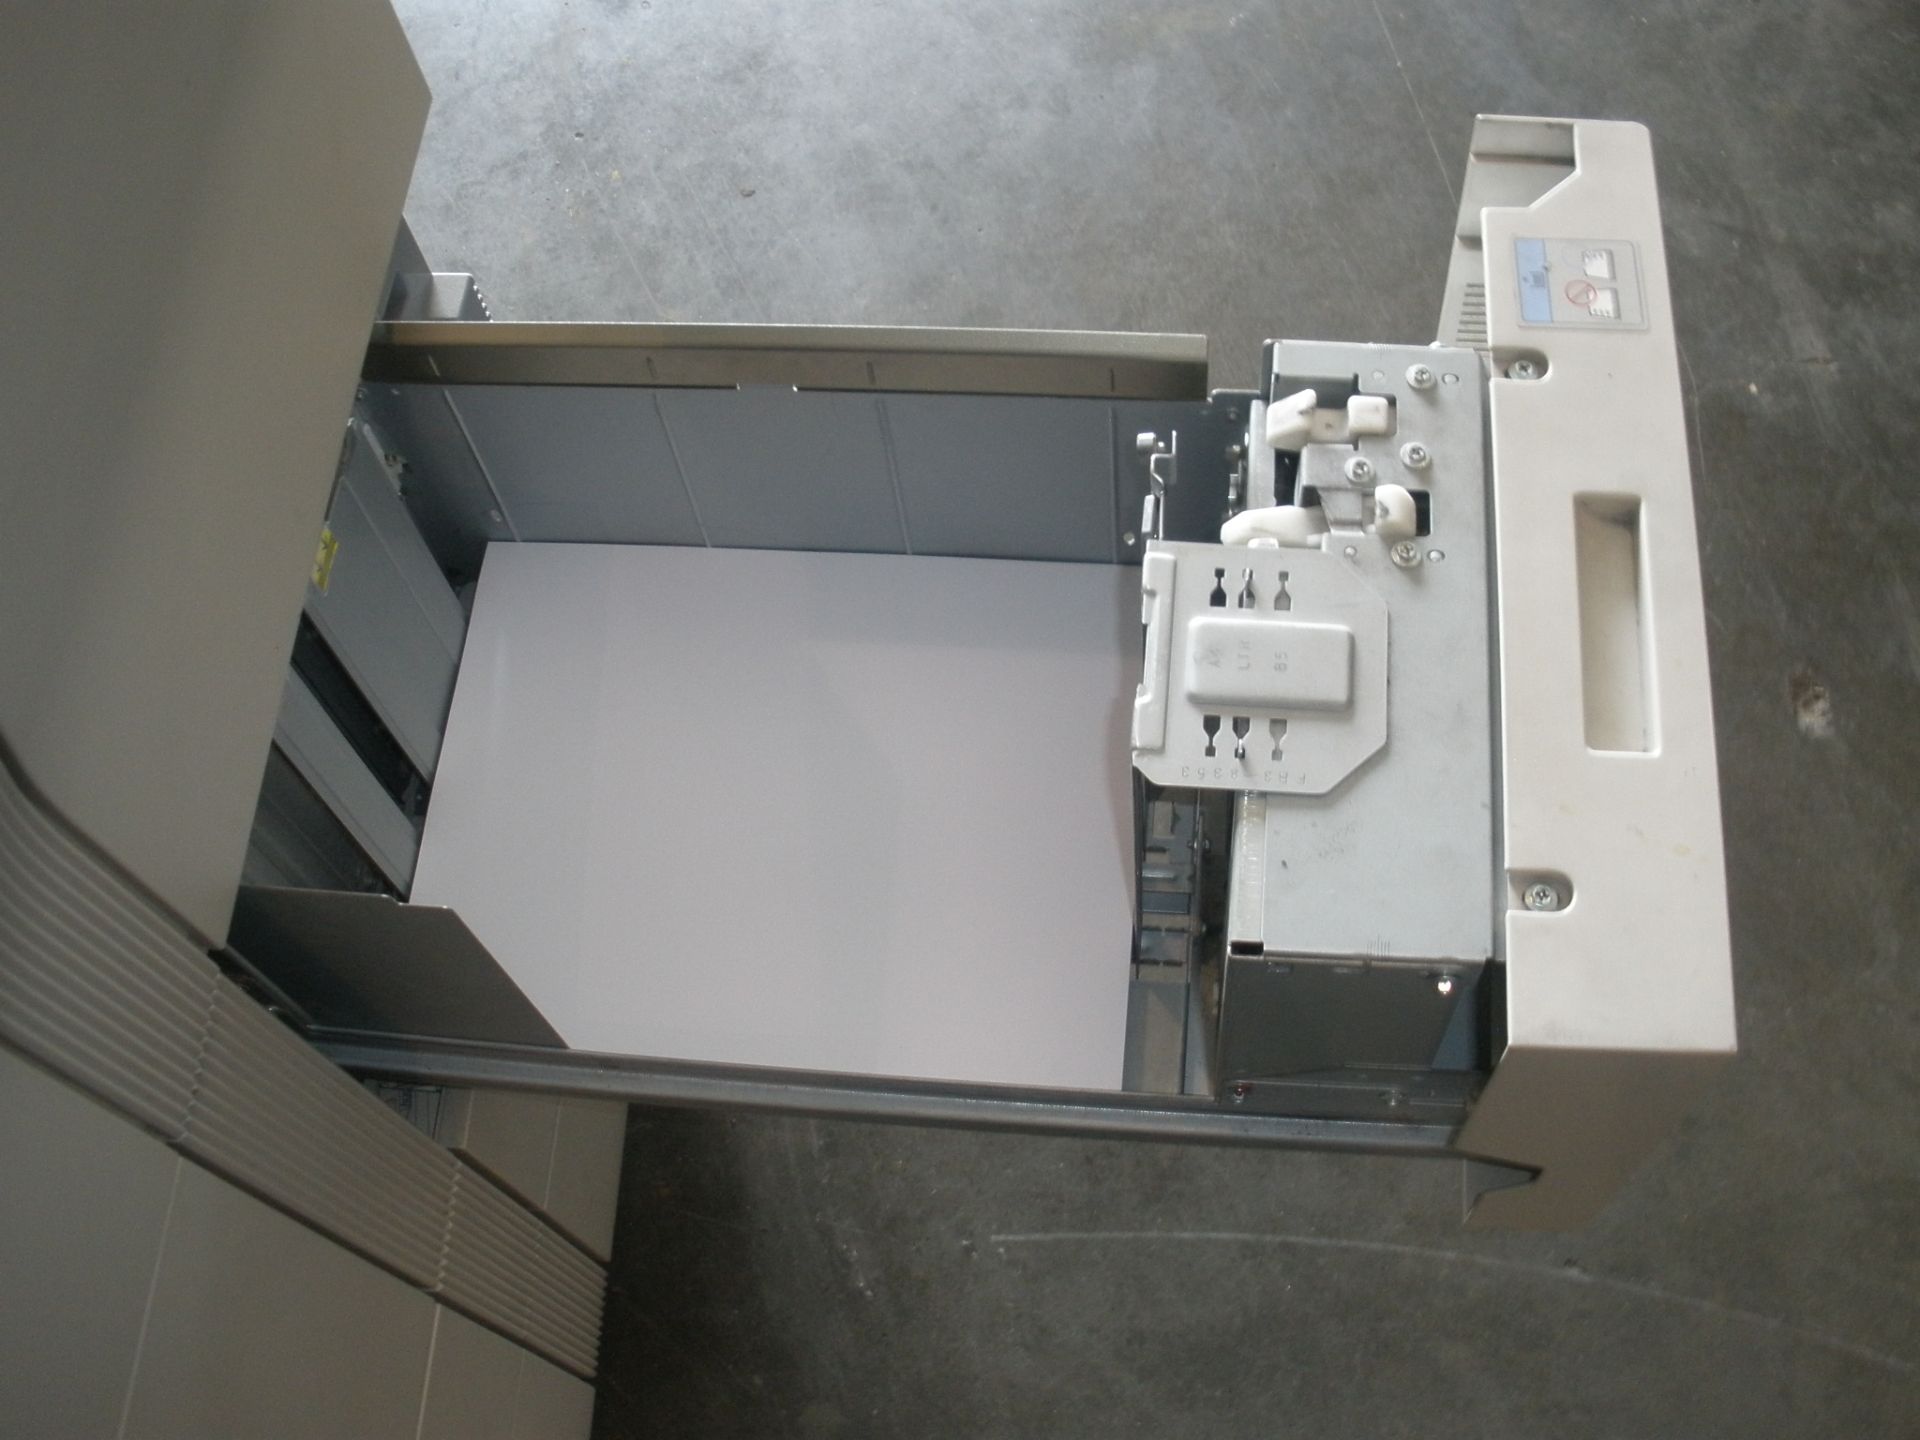 Cannon Image Runner Model 105 Copy Machine Counter 13299482 Copy’s W/Video - Image 7 of 12